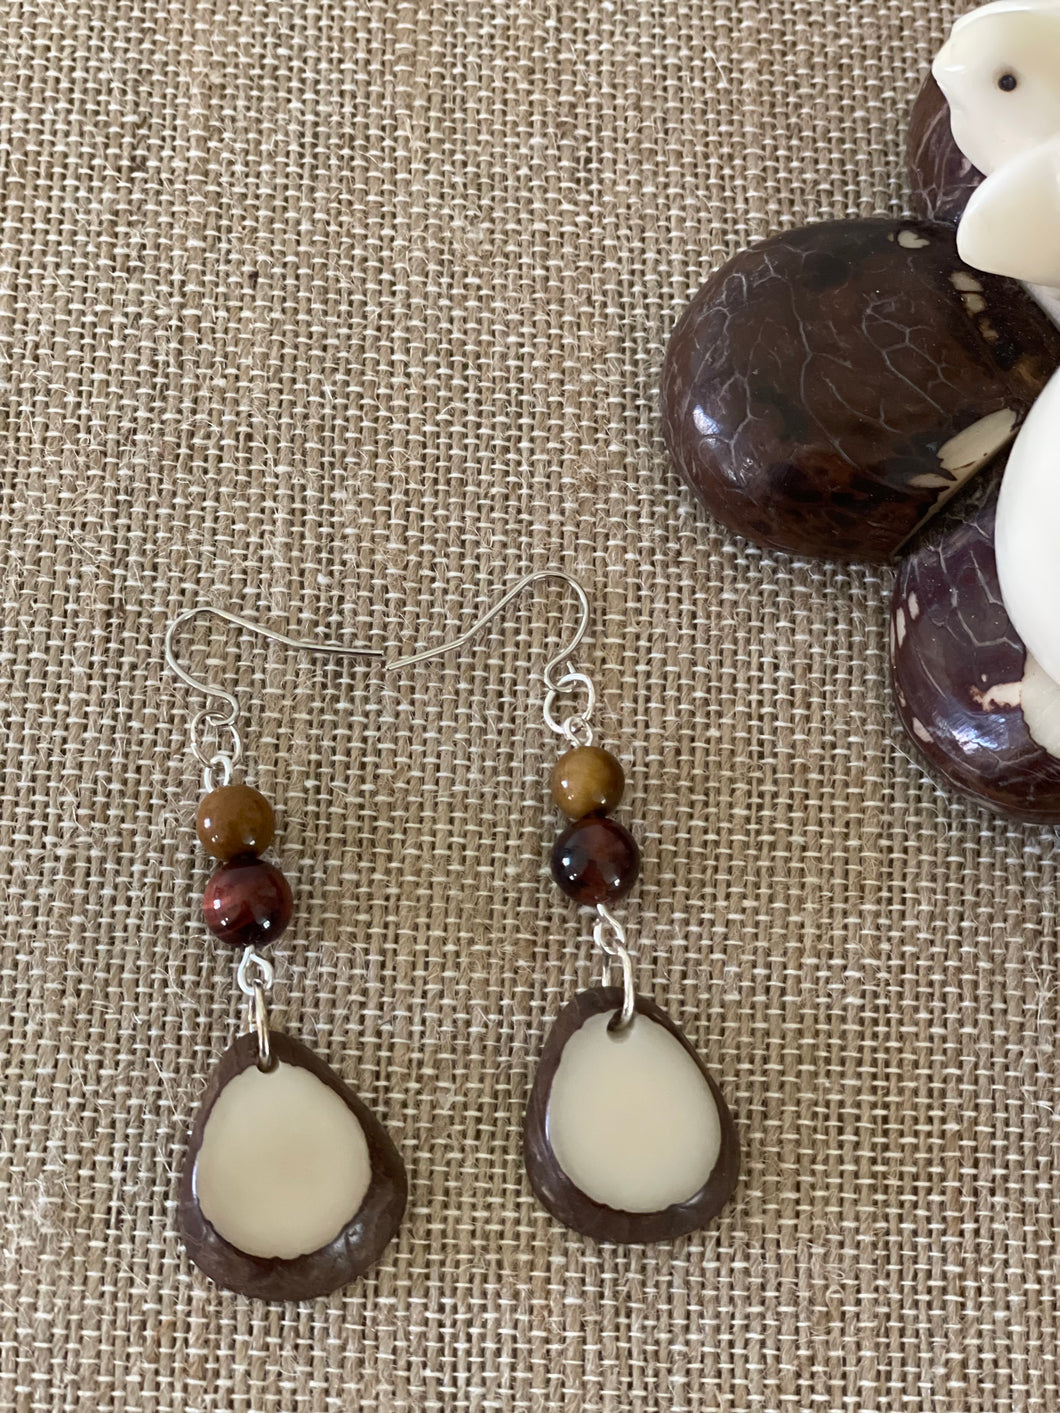 Ivory and Brown Tagua Nut Earrings